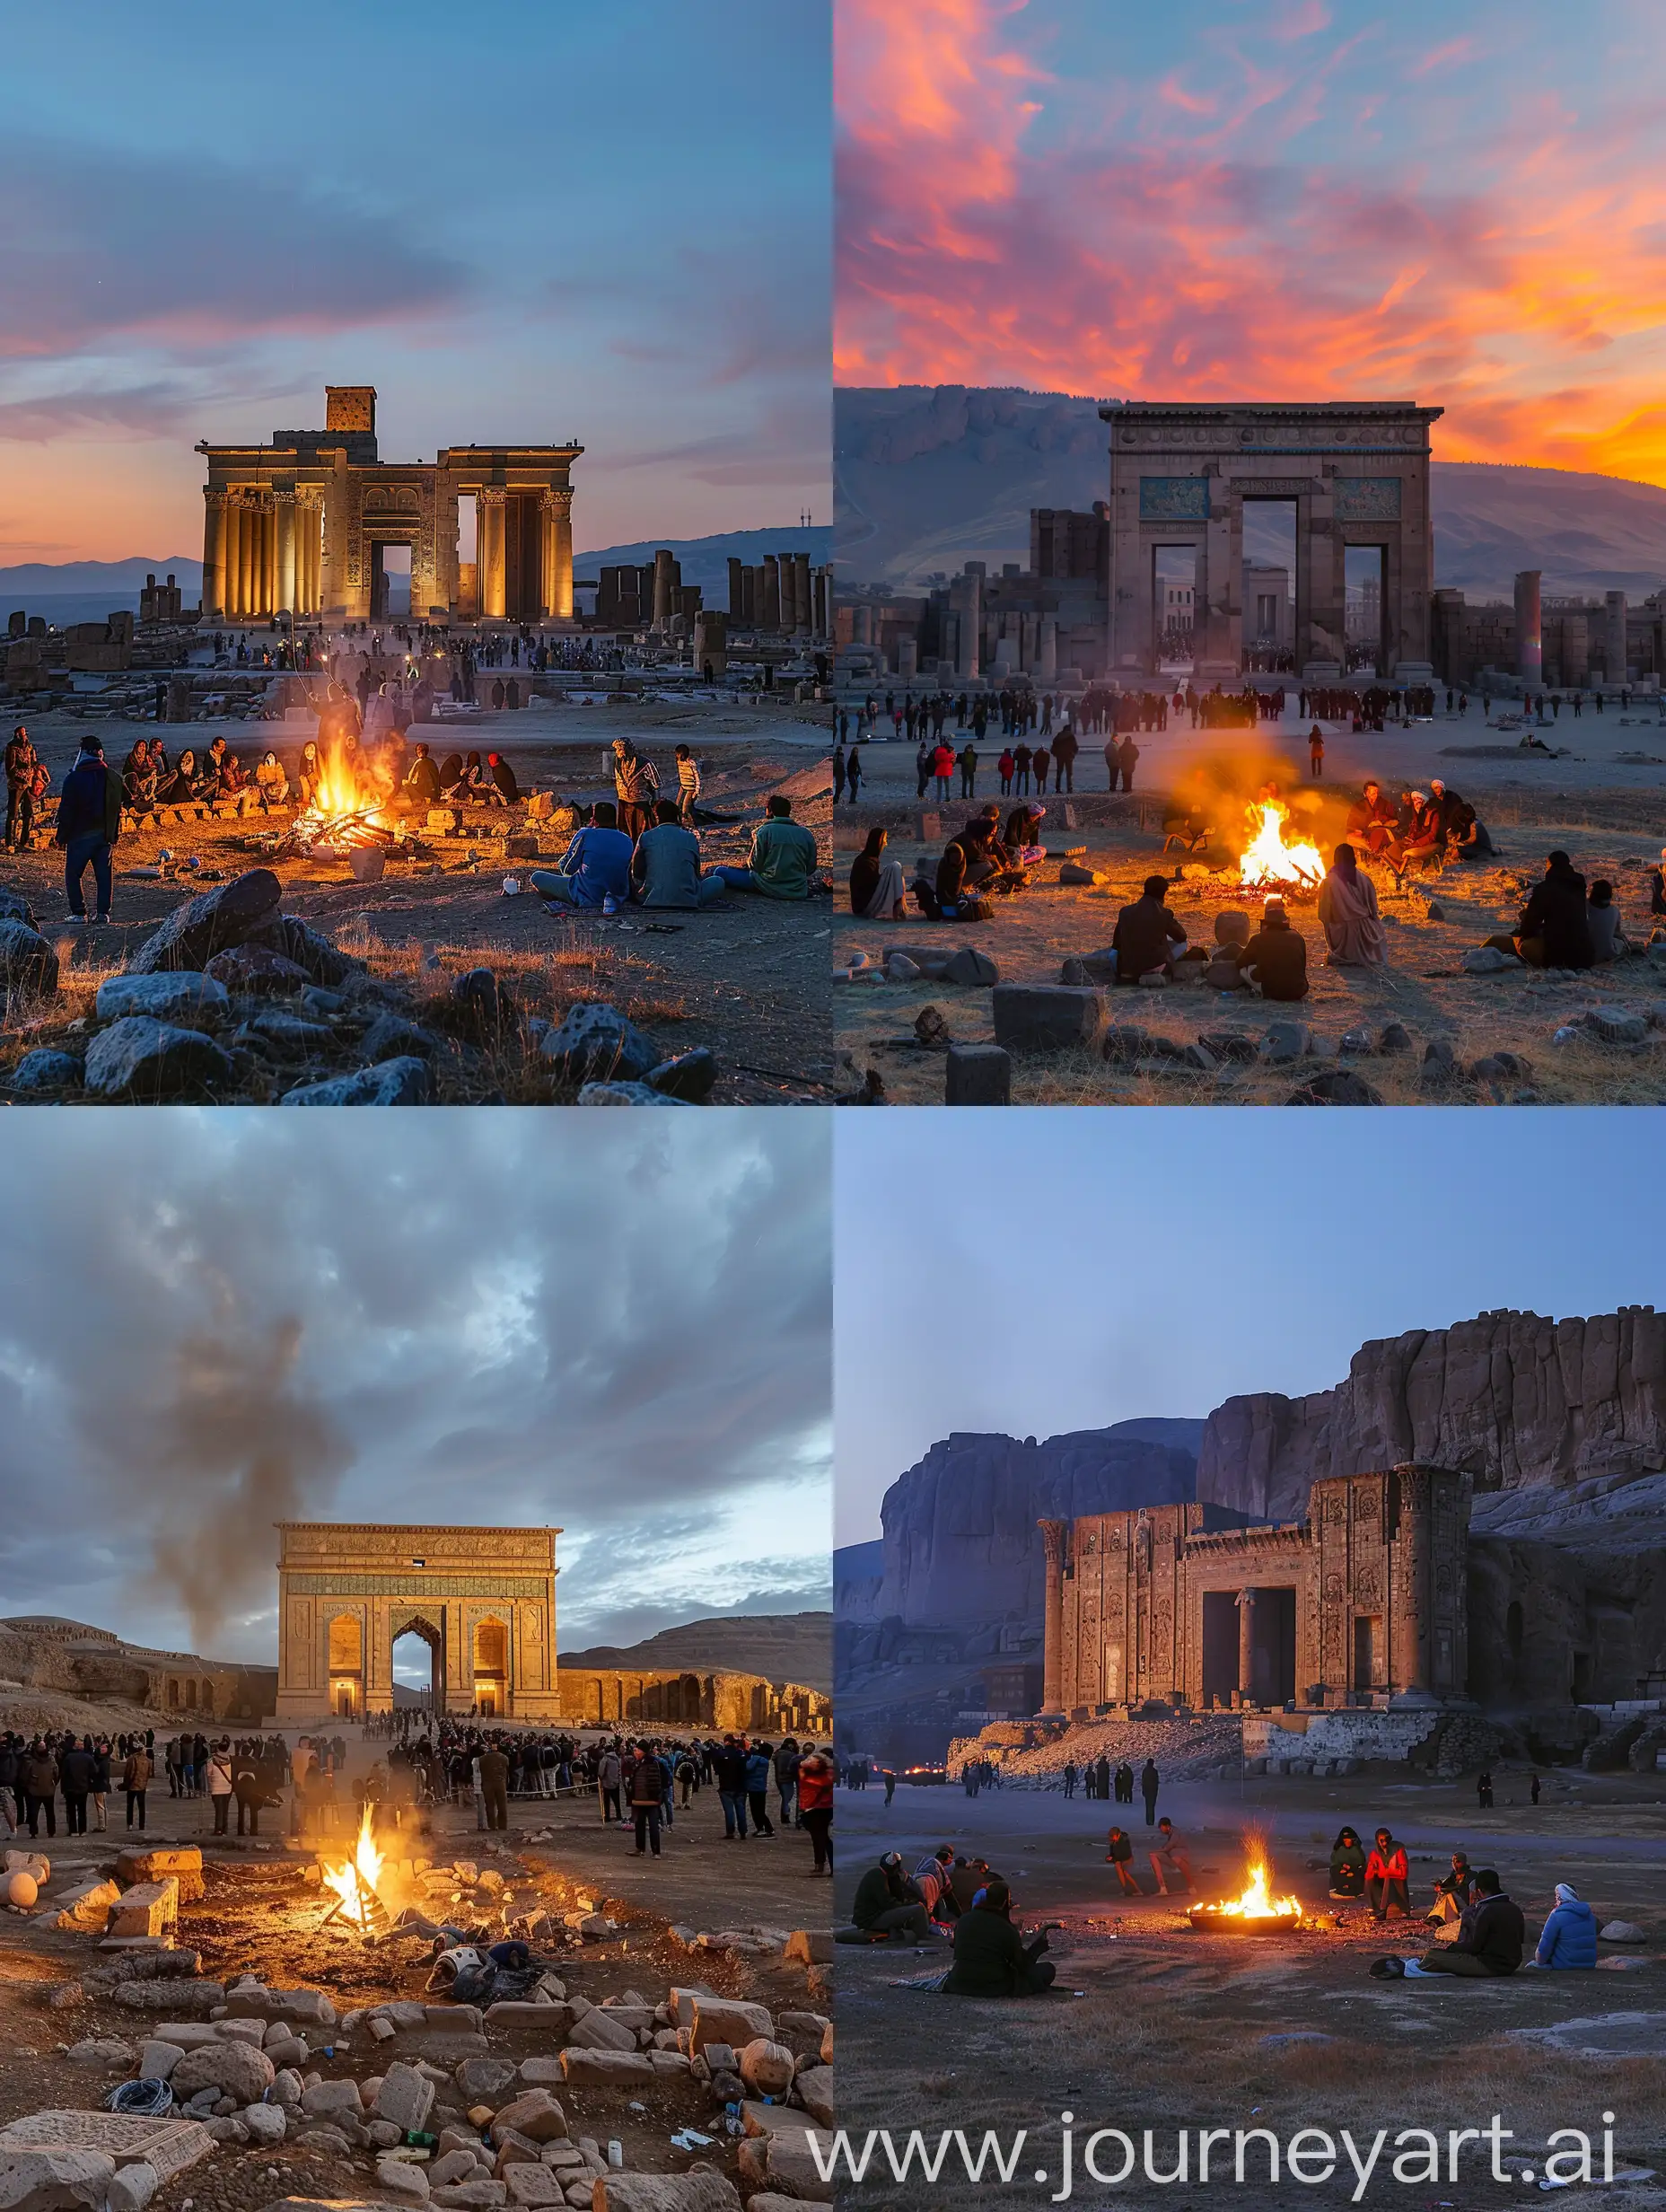 A panorama of Persepolis and people gathered in front of it around the fire